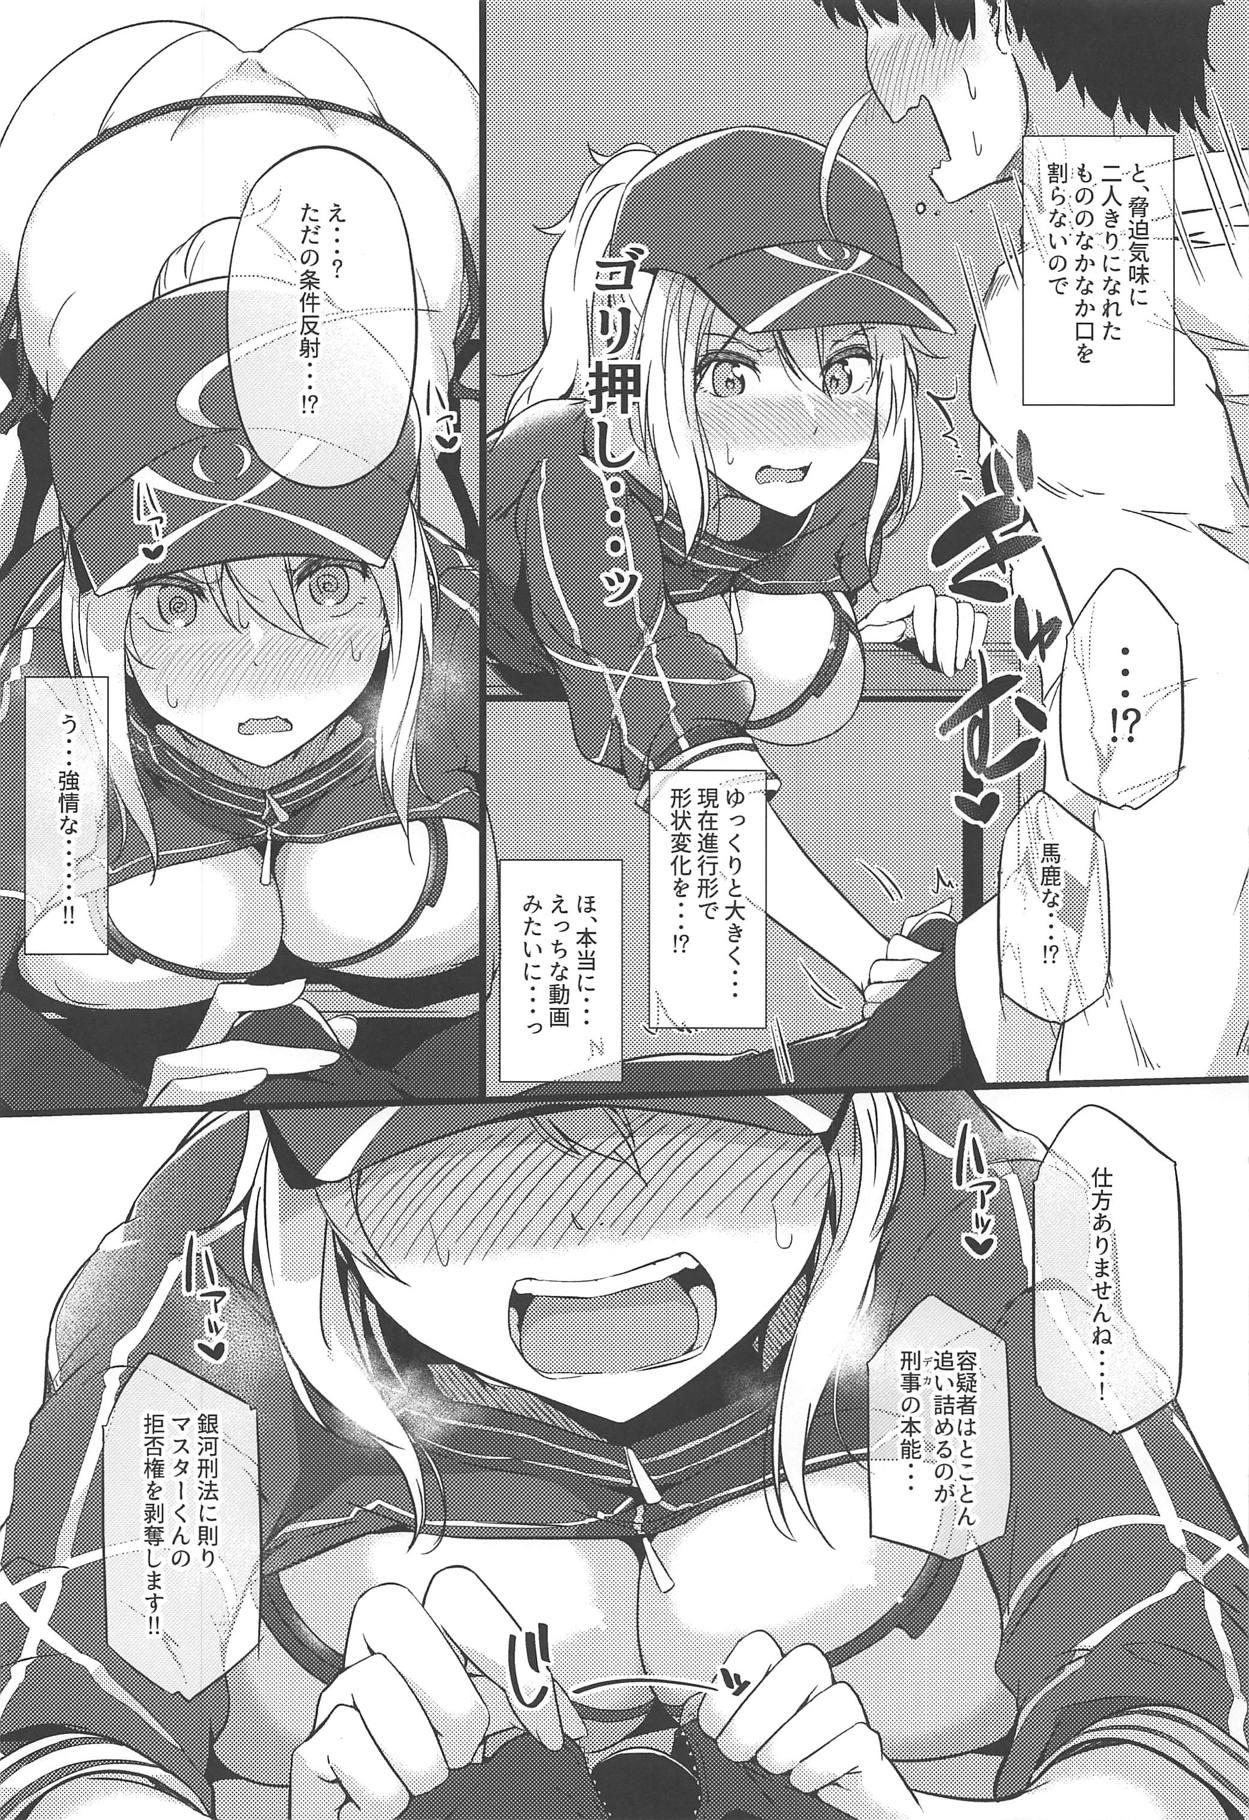 Wet Sasoware Master 2 - Fate grand order Outdoor Sex - Page 3